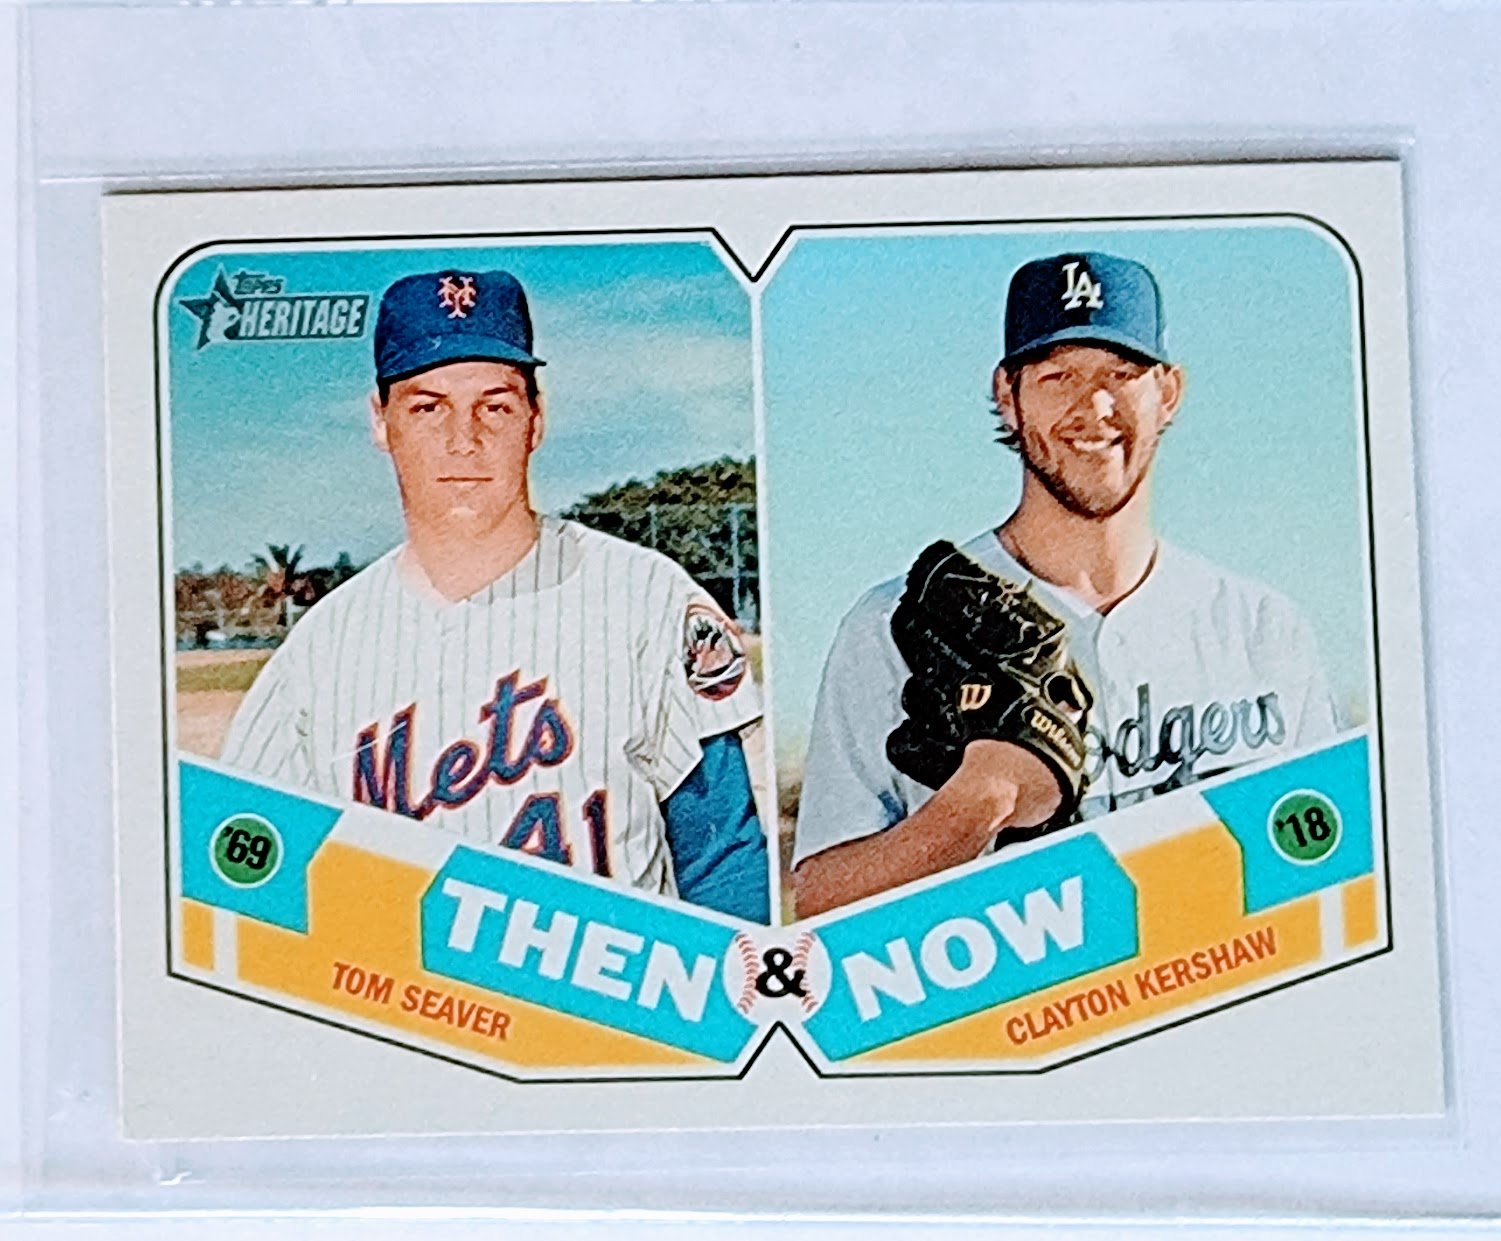 2018 Topps Heritage Tom Seaver & Clayton Kershaw Then & Now Insert Baseball Card TPTV simple Xclusive Collectibles   